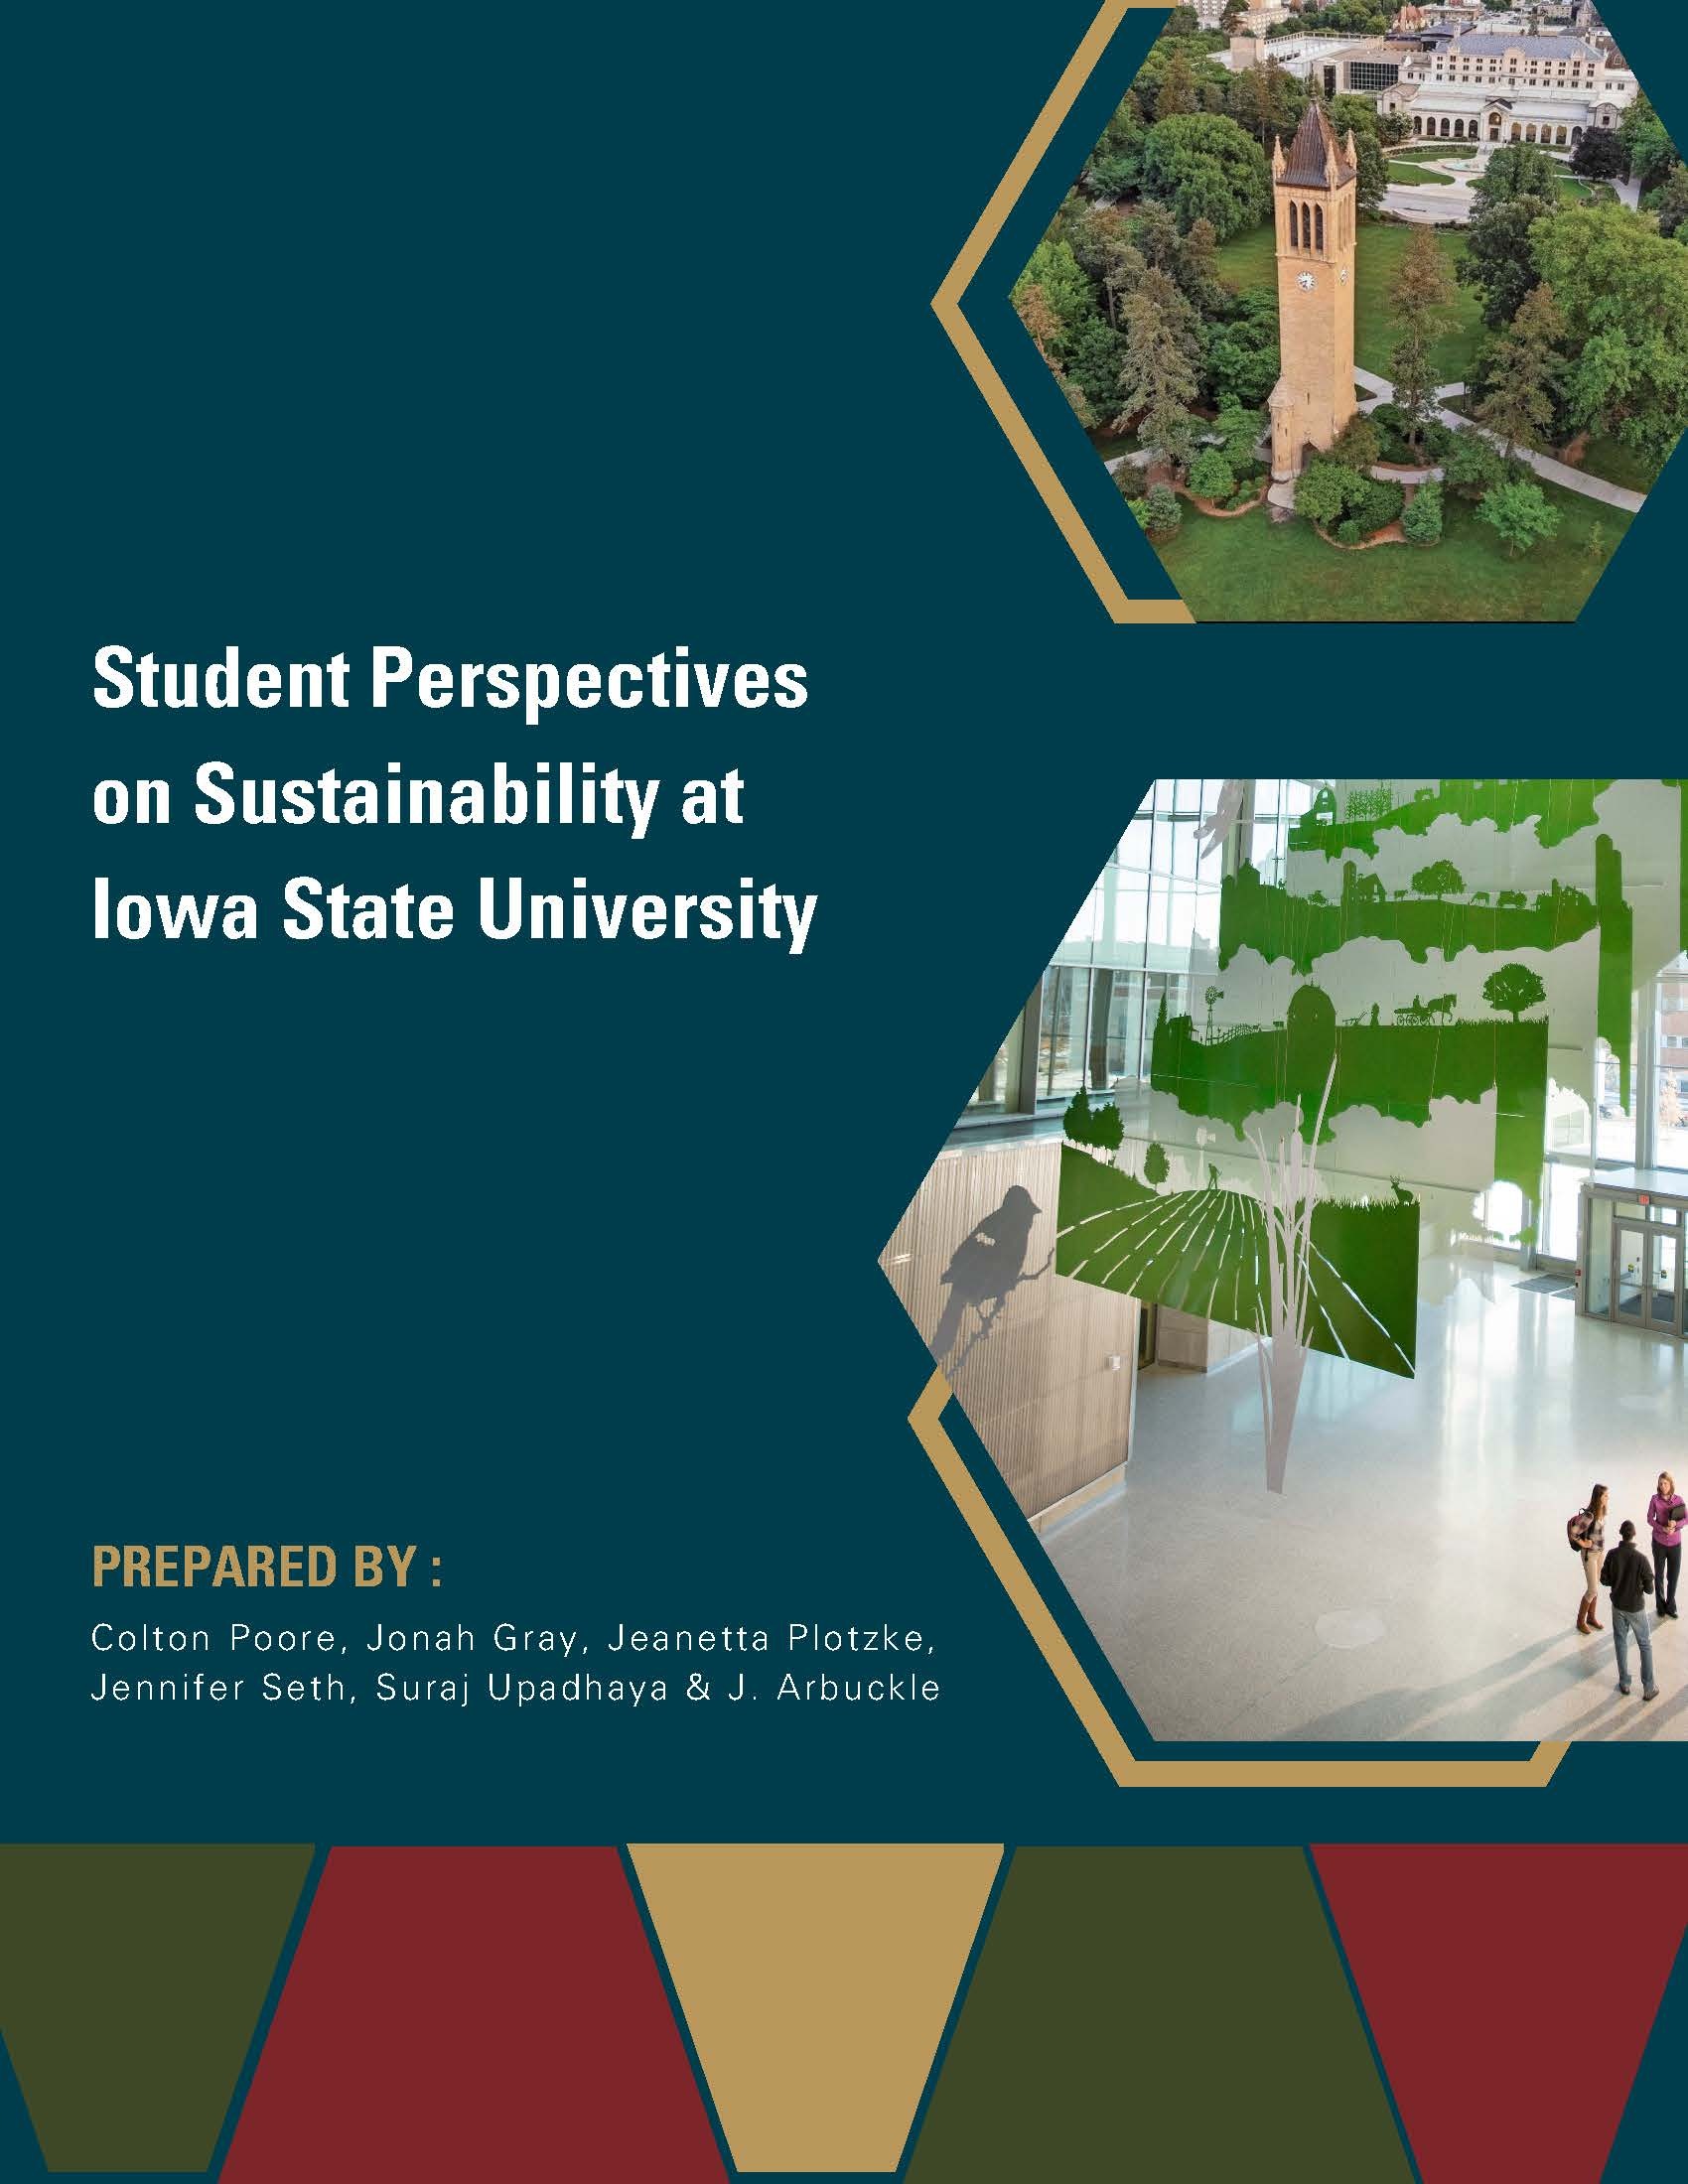 C-CHANGE Student Perspectives on Sustainability at ISU Report 20